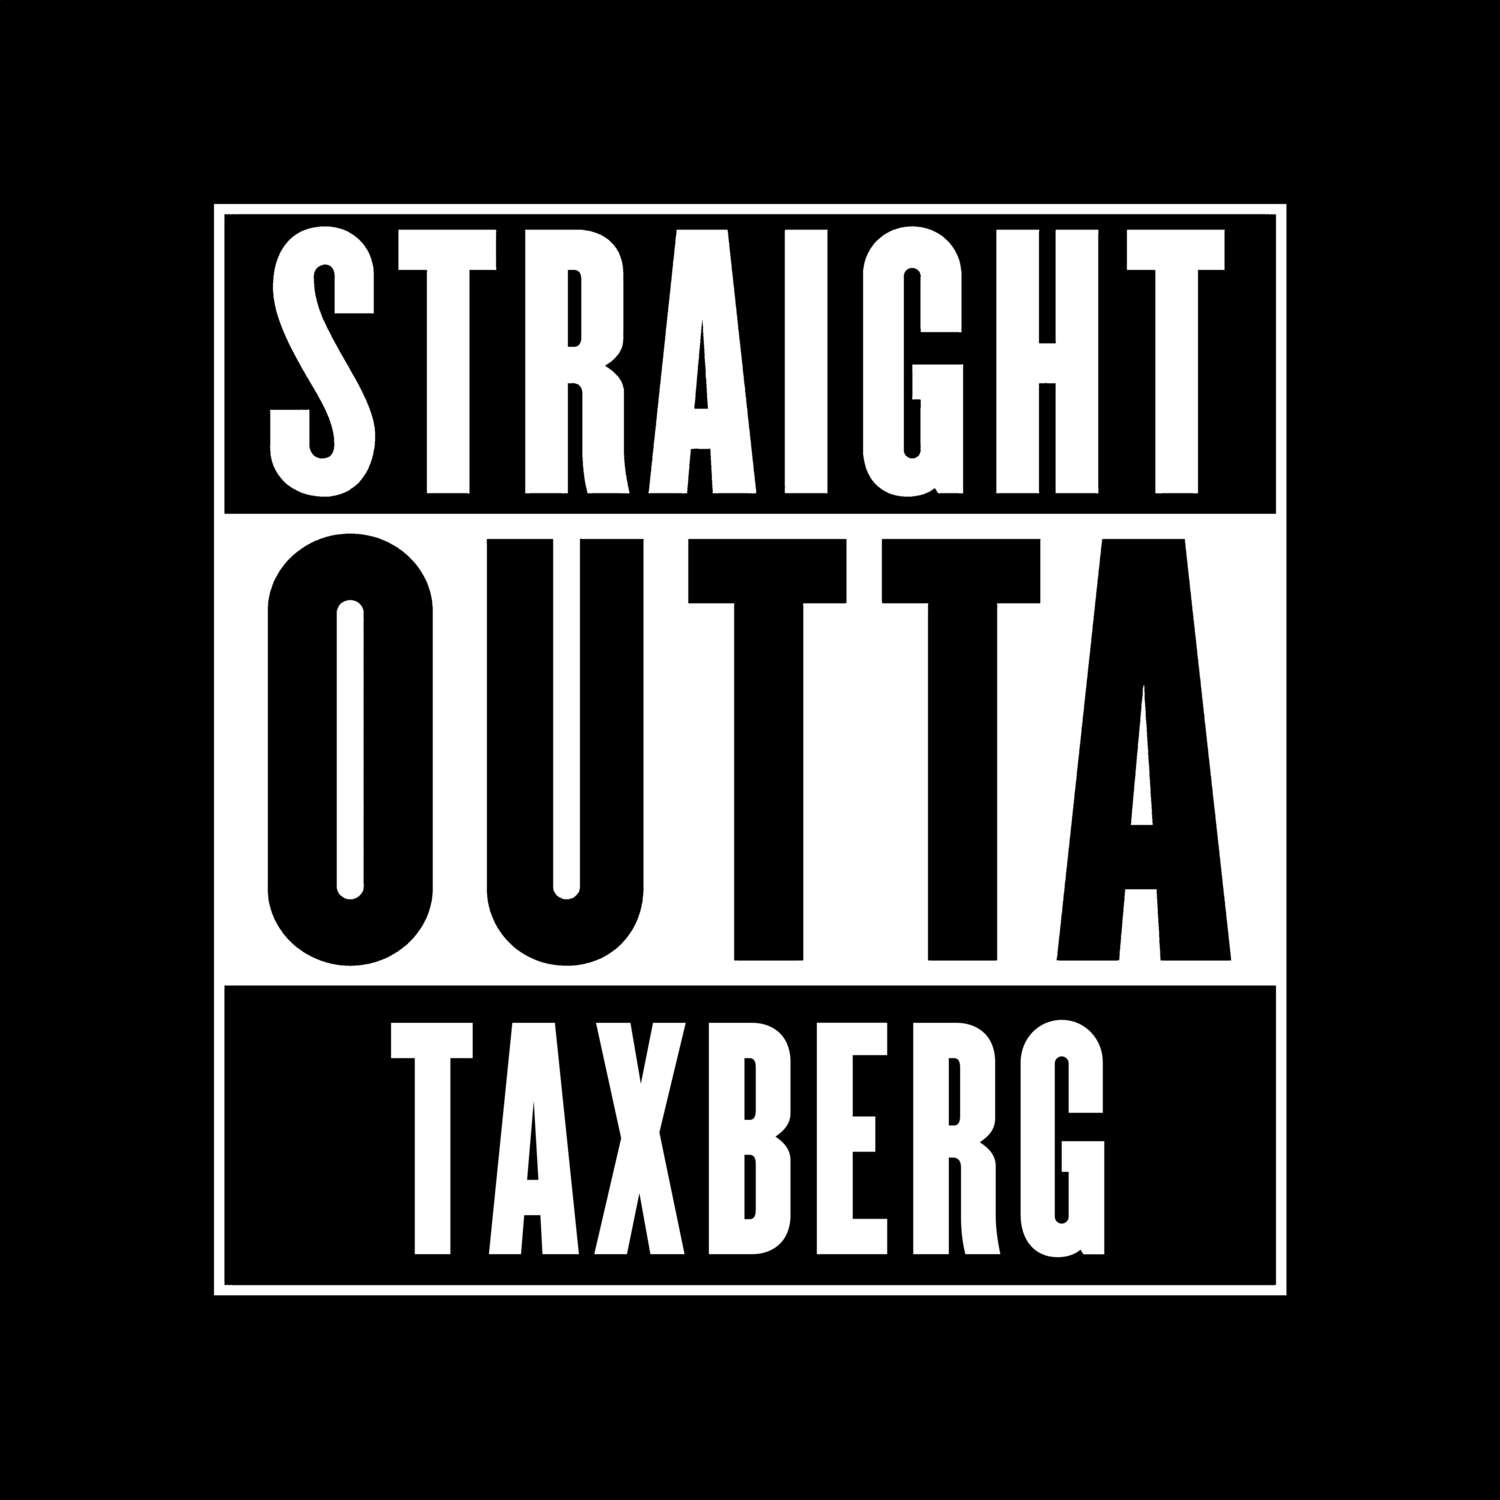 Taxberg T-Shirt »Straight Outta«